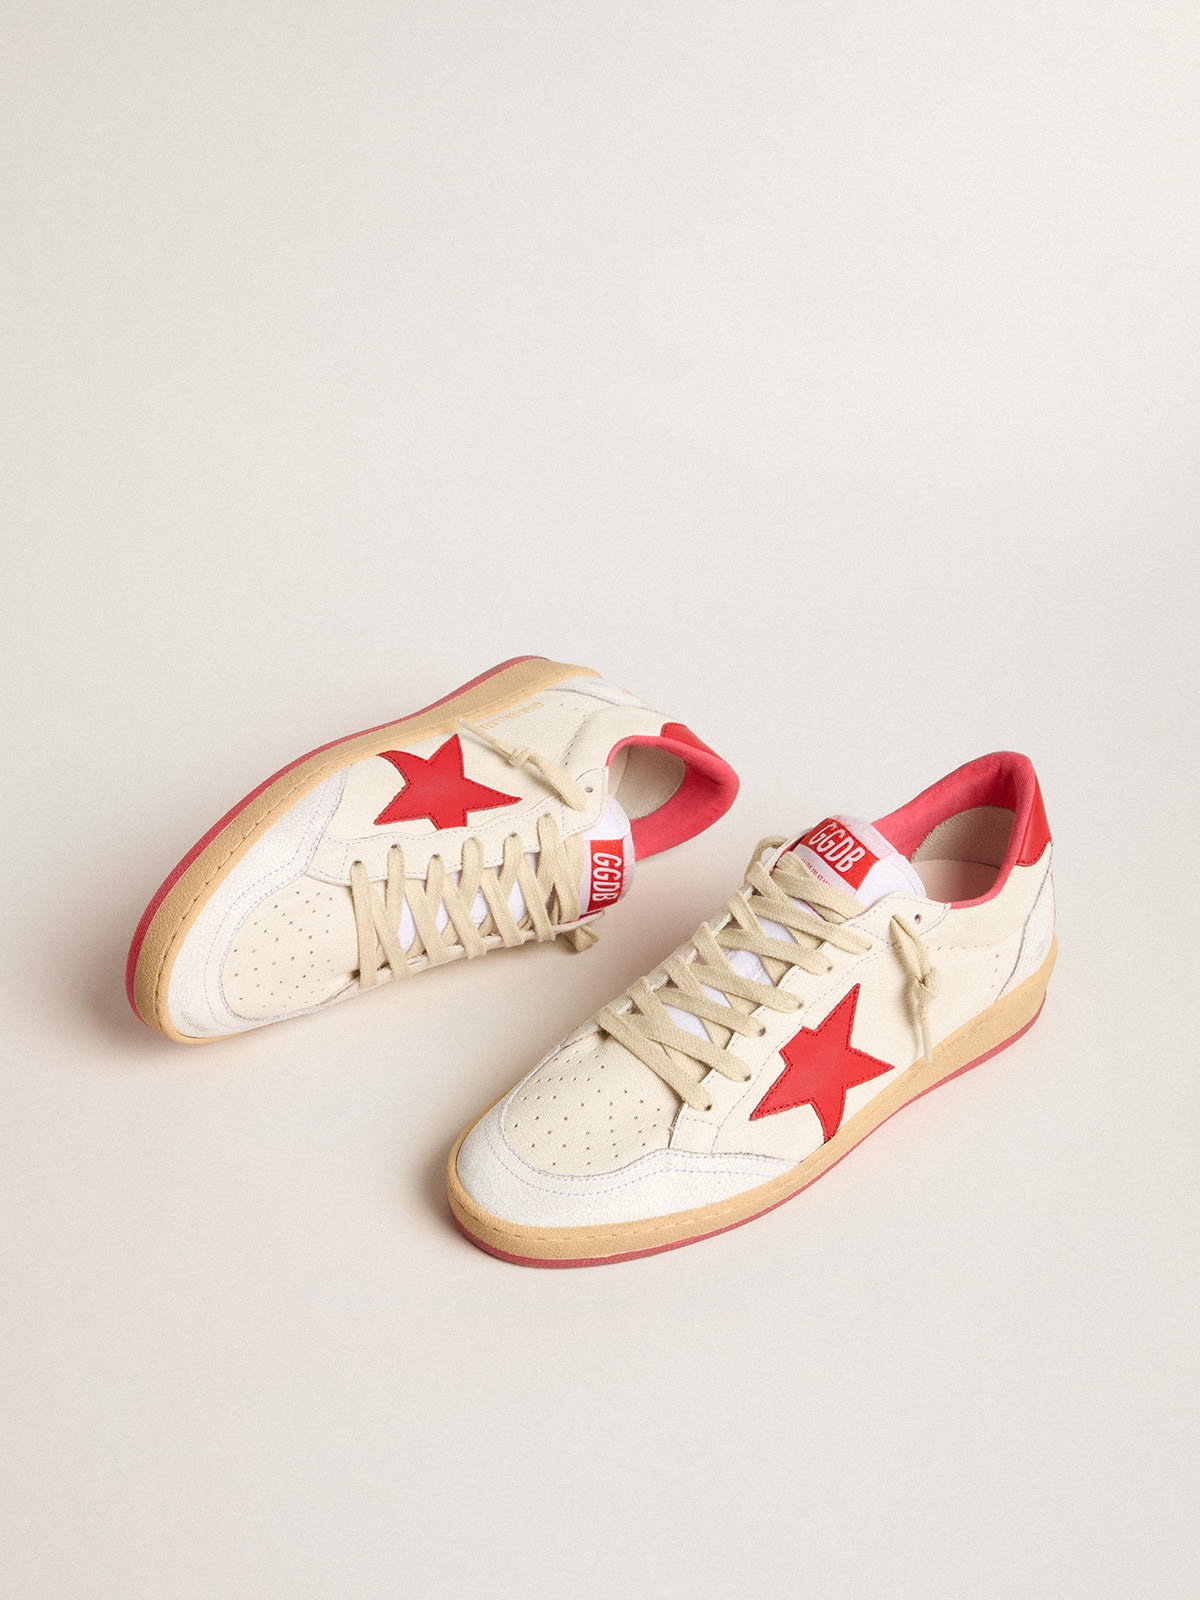 Men’s Ball Star  Wishes in white leather with a red star and heel tab - 3